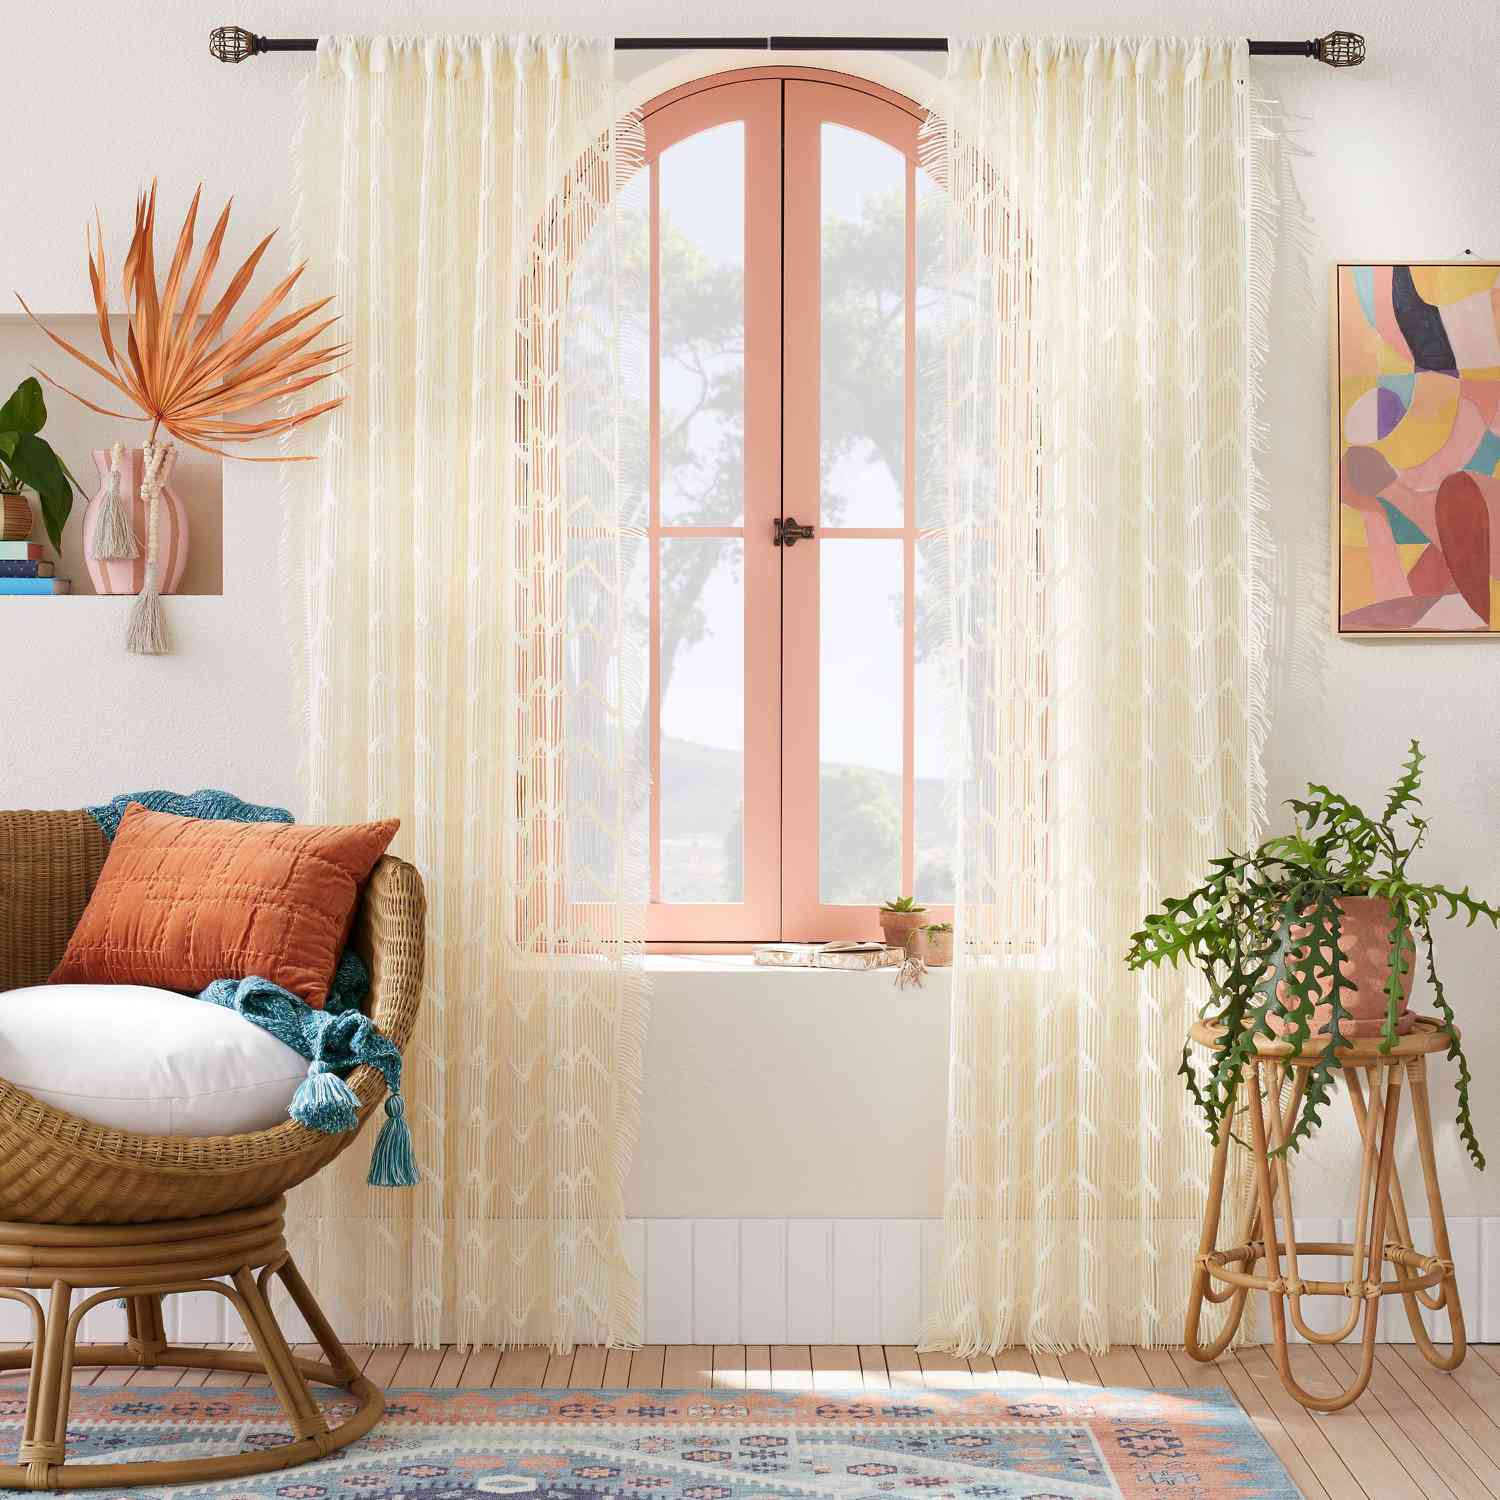 Zig Zag Macrame Sheer Curtain Panel from Justina Blakeney x Opalhouse collection at Target